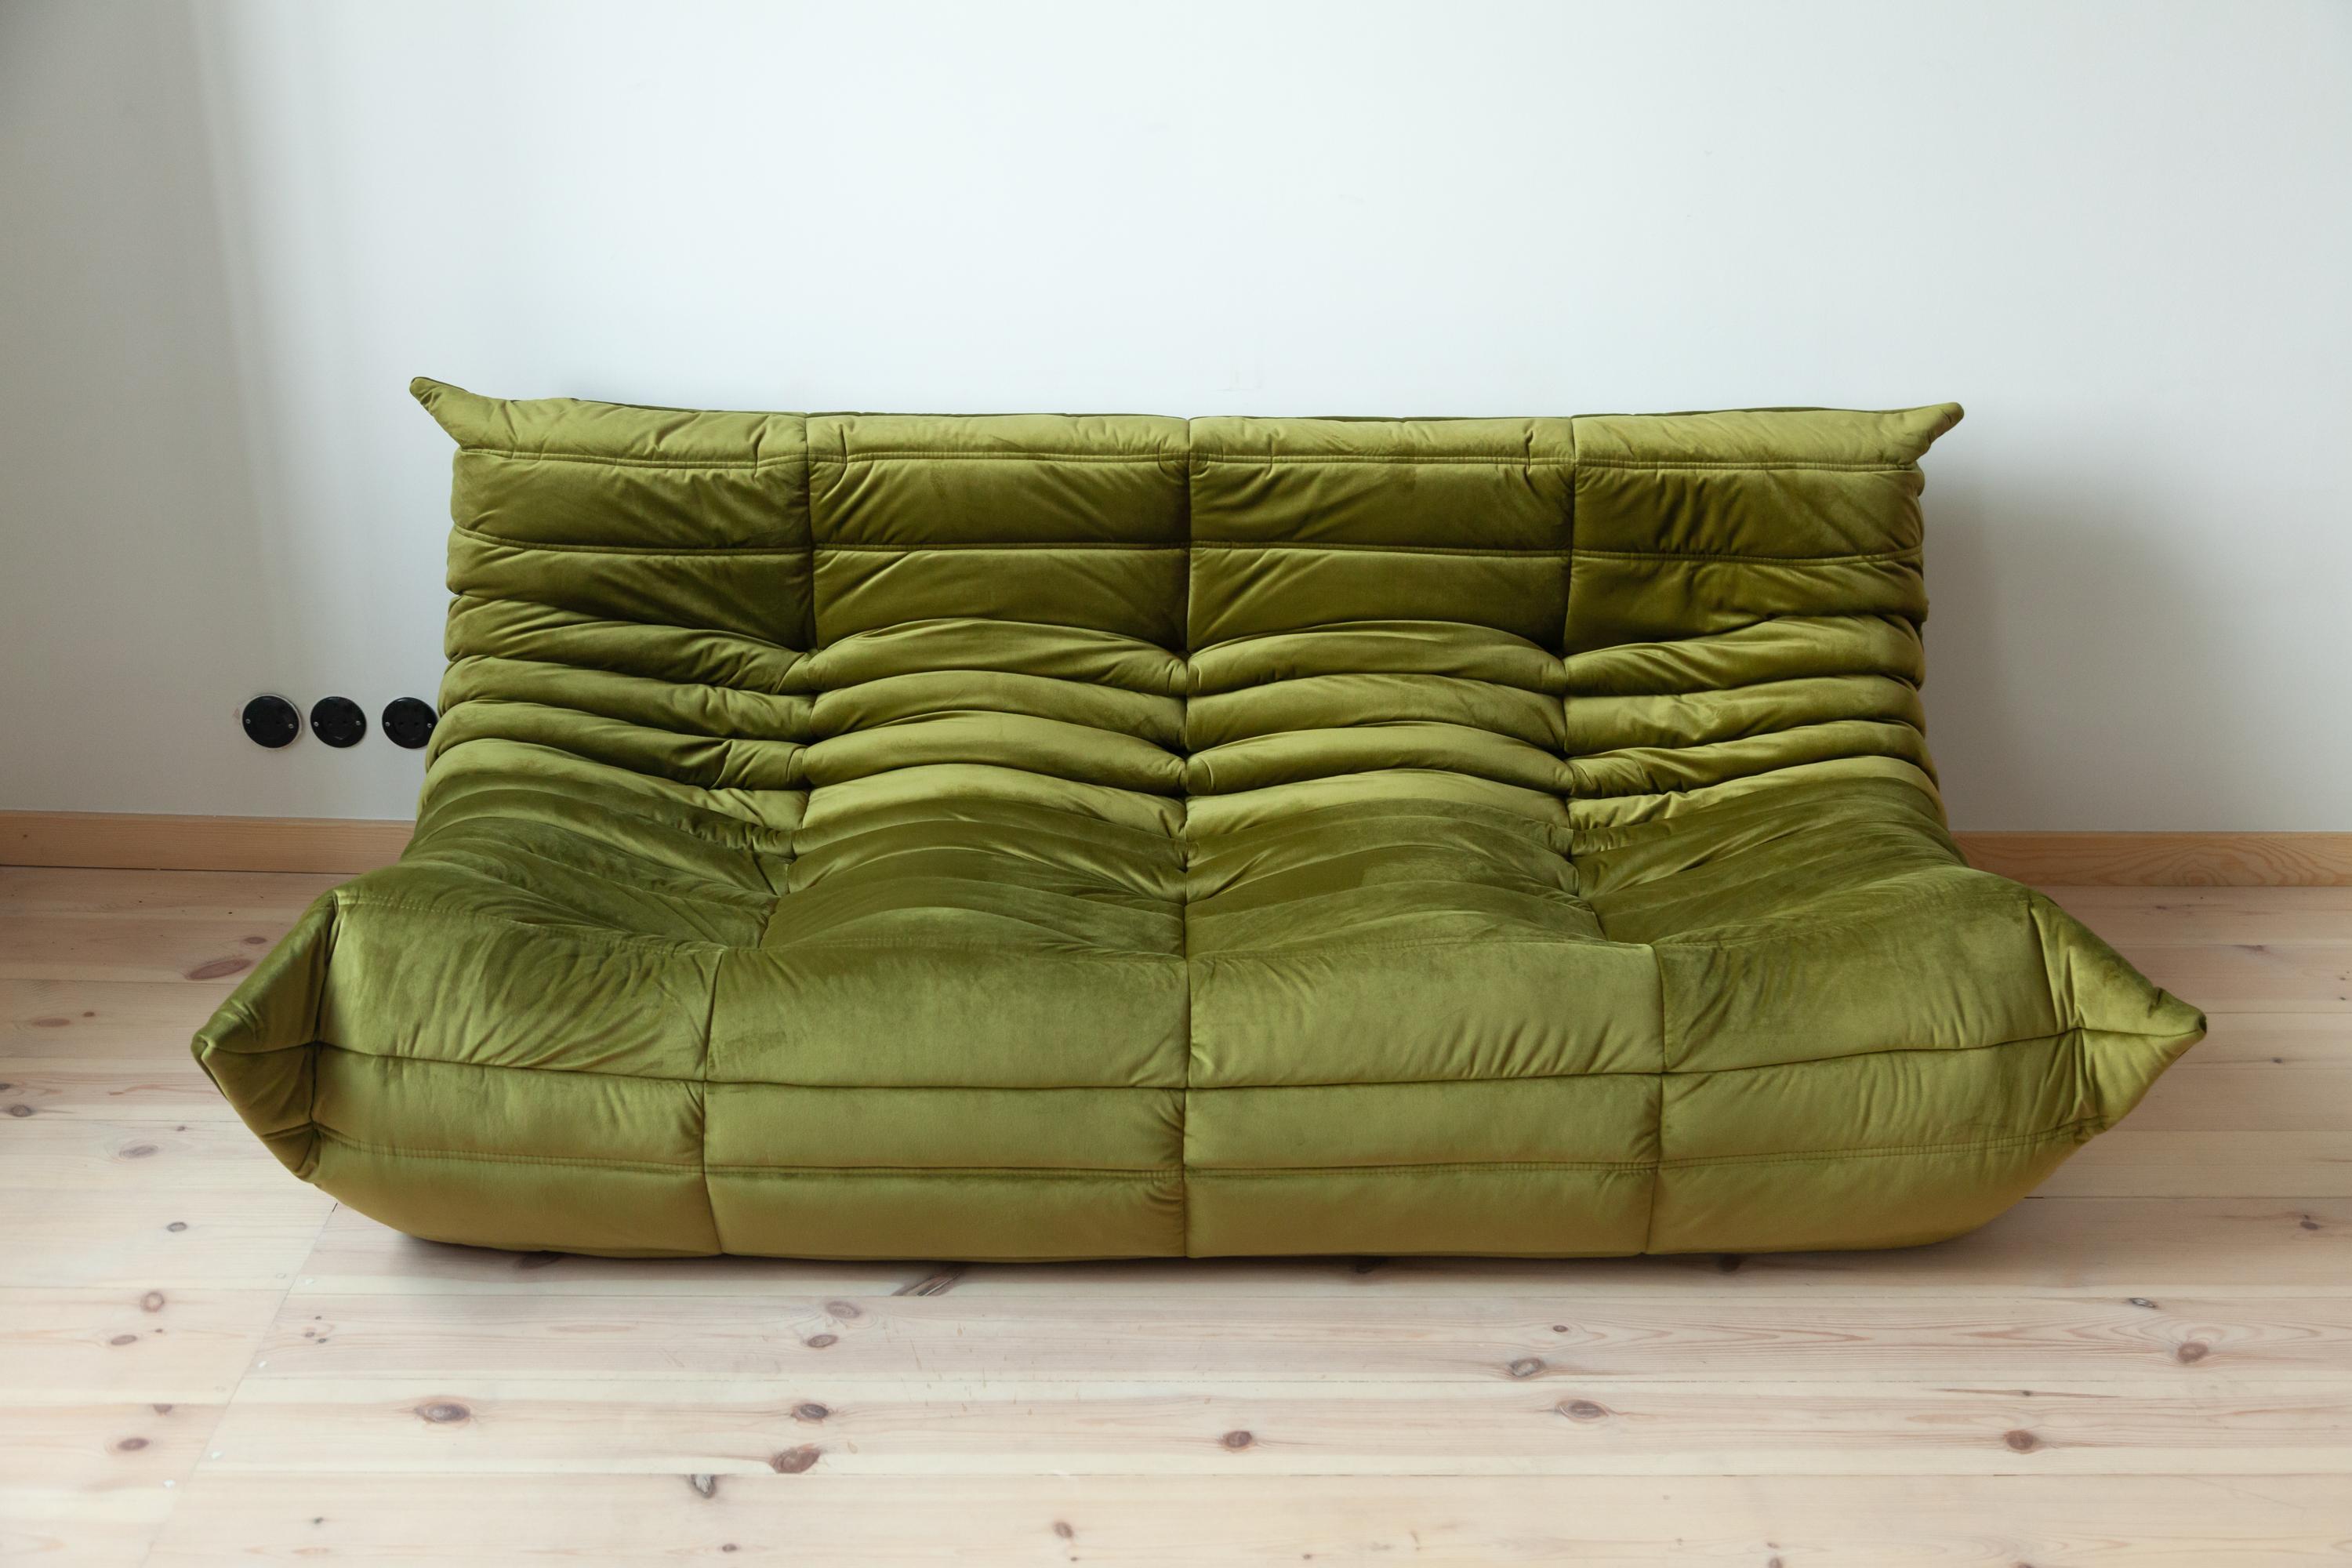 This vintage Togo three-seat sofa was designed by Michel Ducaroy in 1973 and was manufactured by Ligne Roset in France. It has been reupholstered in new olive green velvet (70 x 174 x 102 cm). It has the original Ligne Roset logo and genuine Ligne